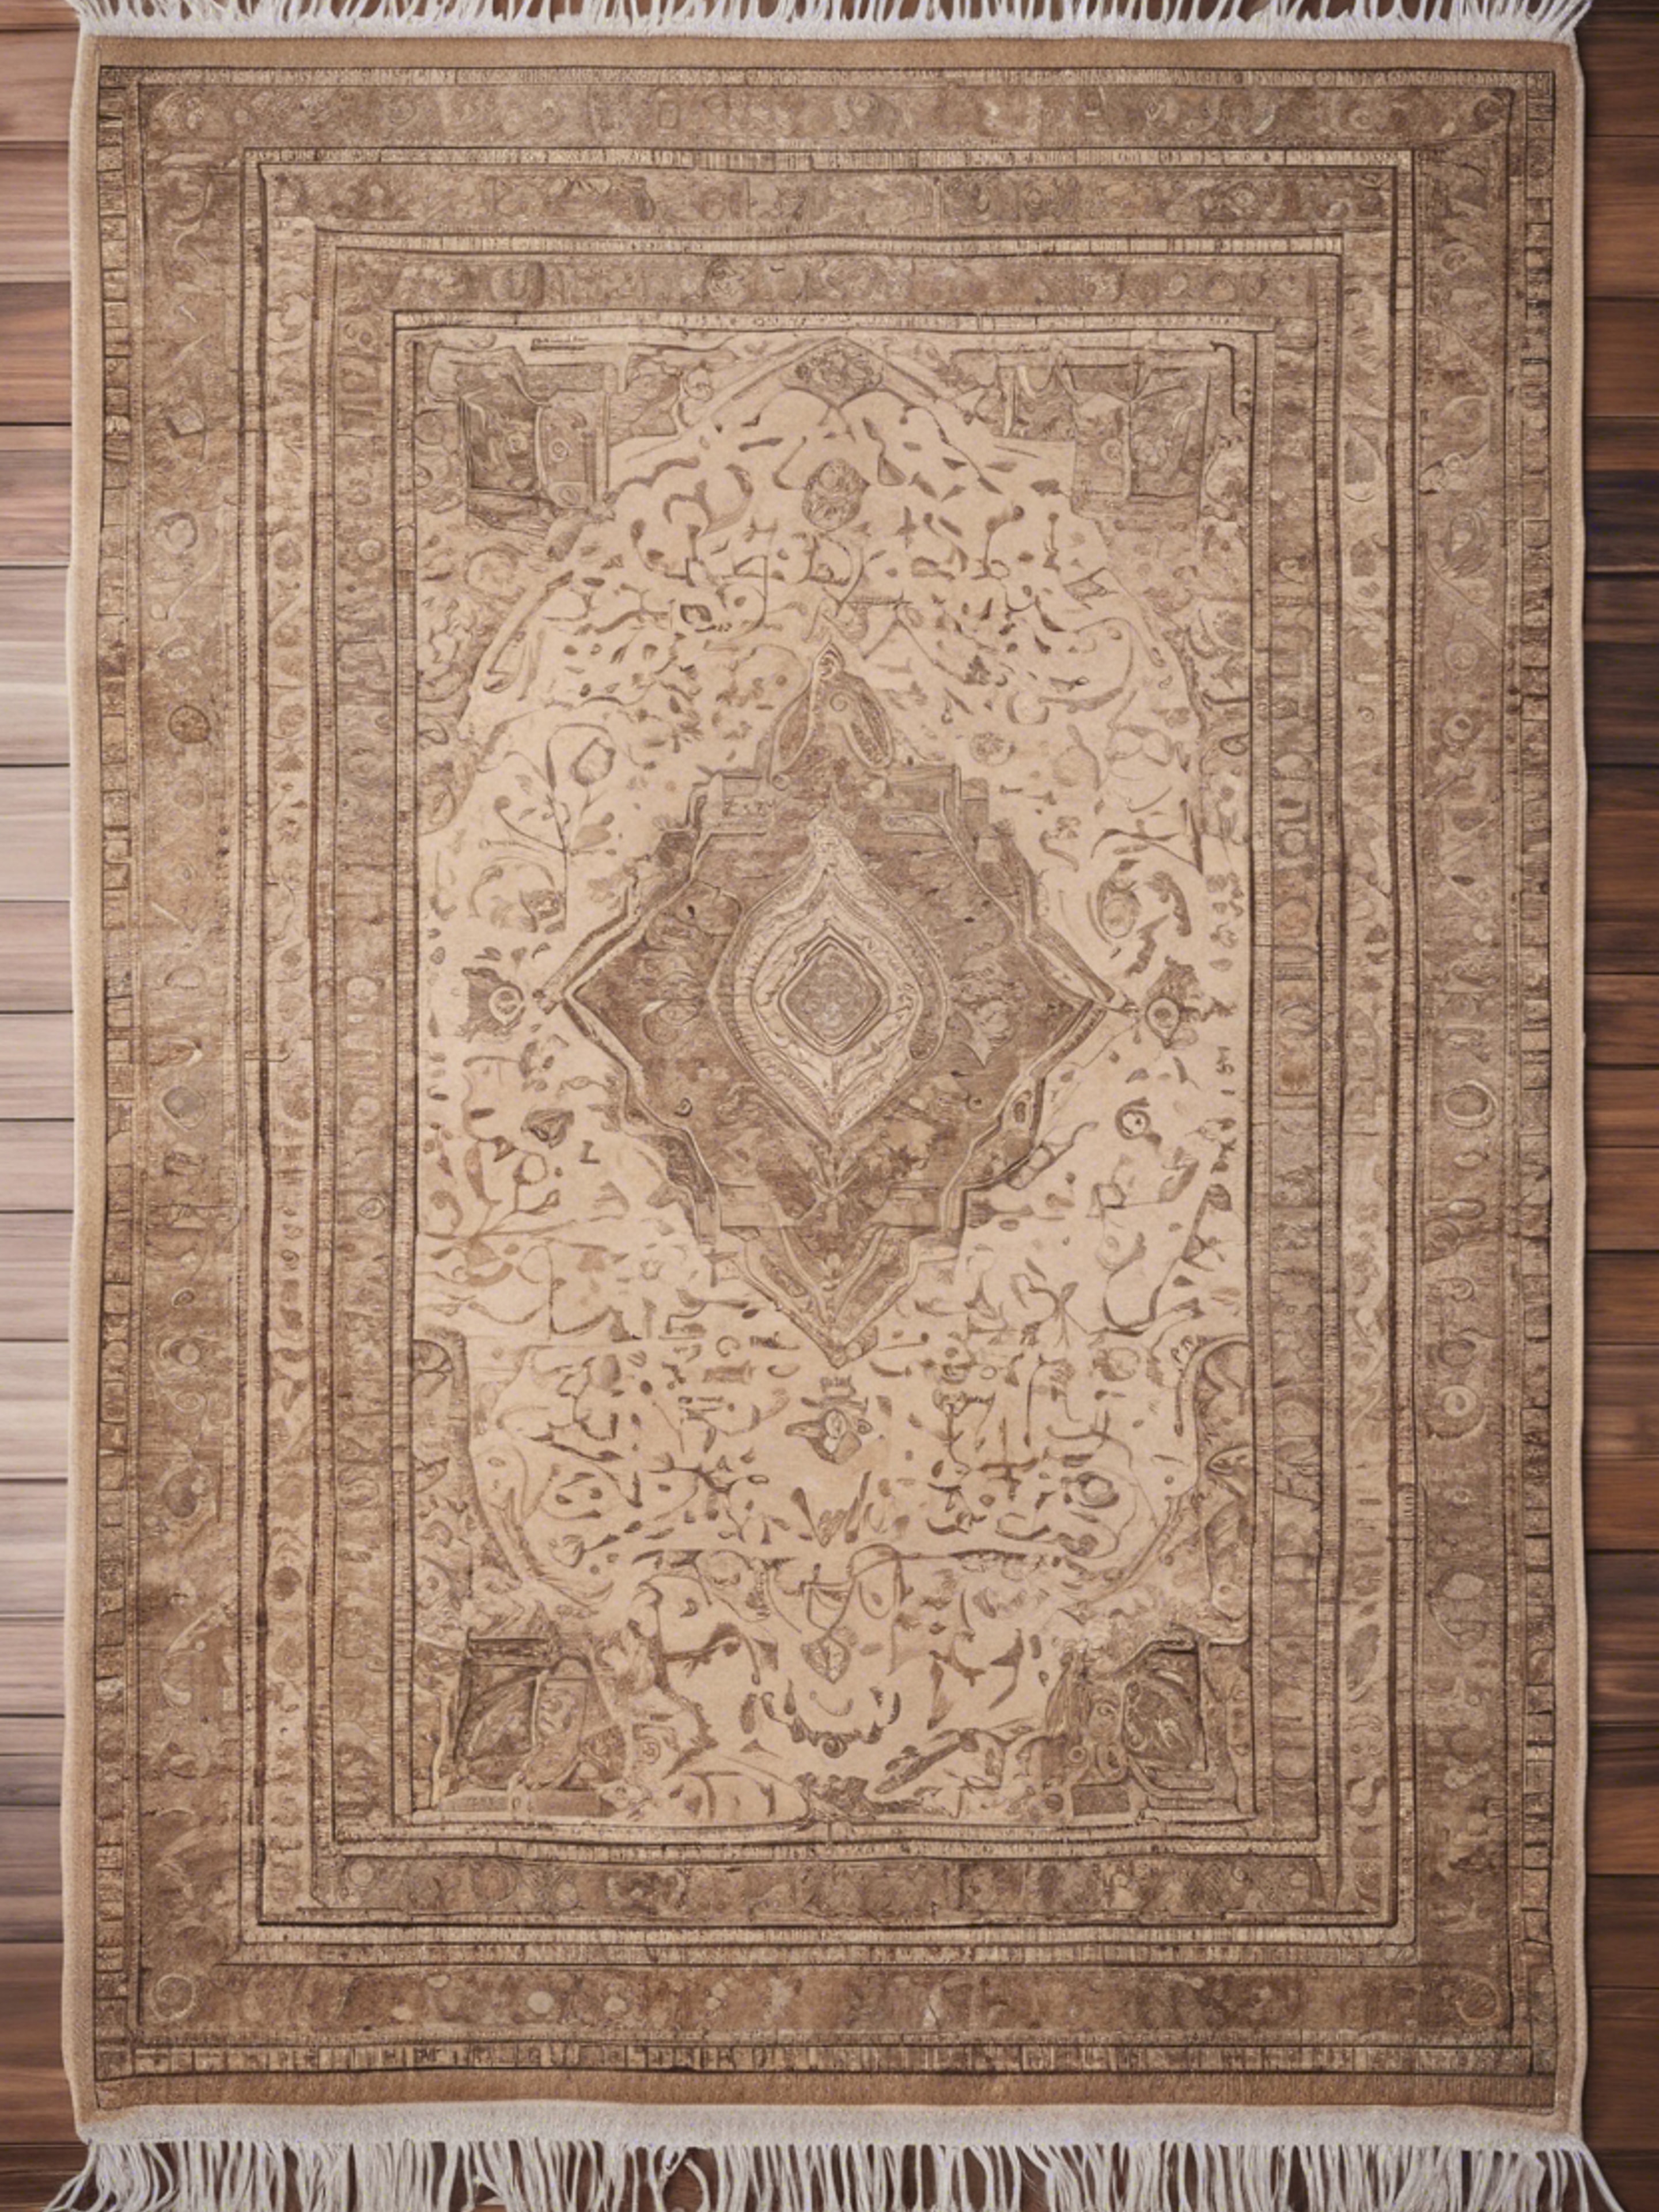 A beige Bohemian-style rug on a wooden floor. Wallpaper[f12c8edc66544379a33a]